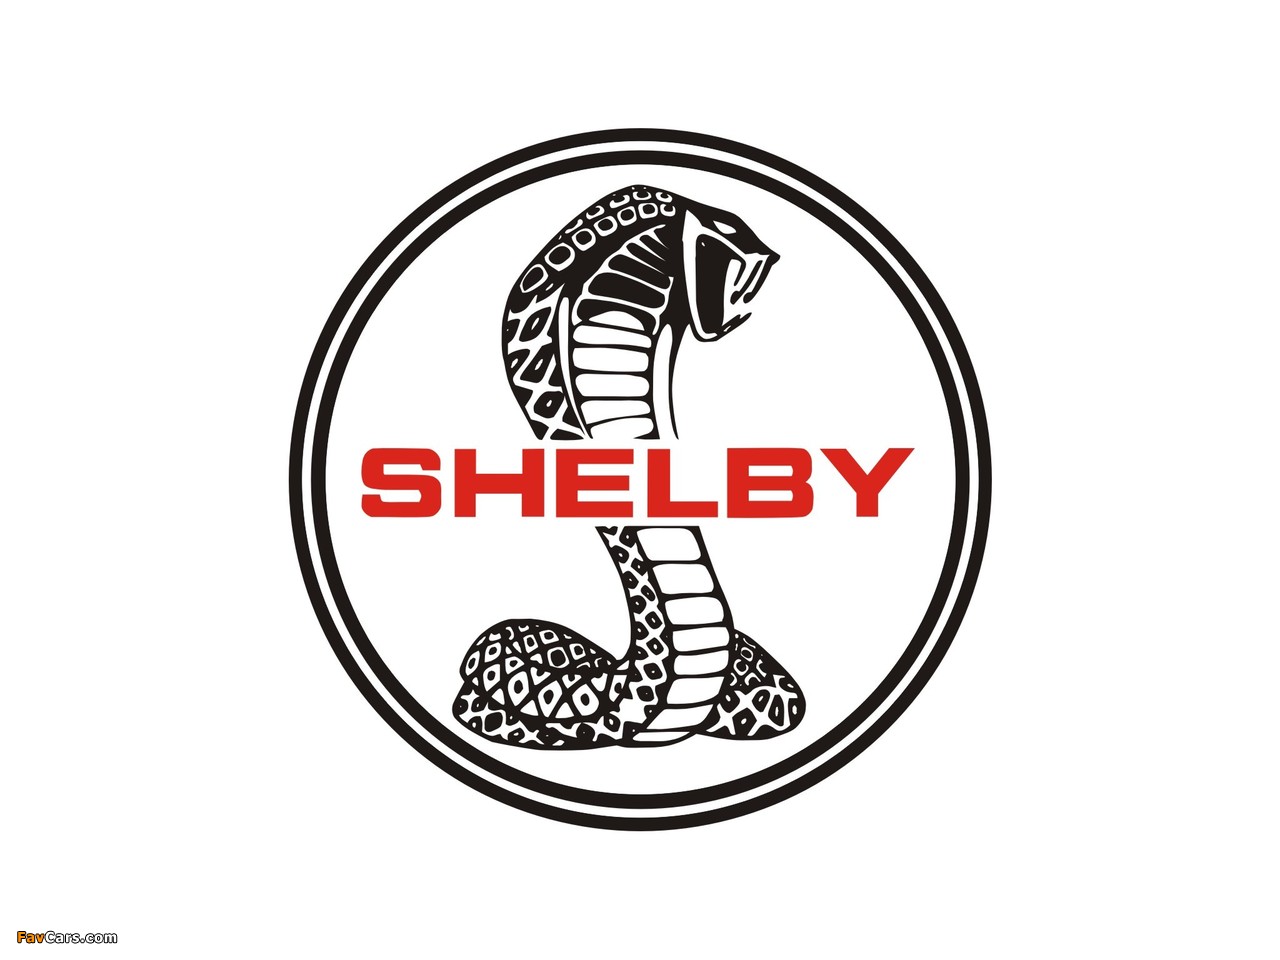 Shelby wallpapers (1280 x 960)